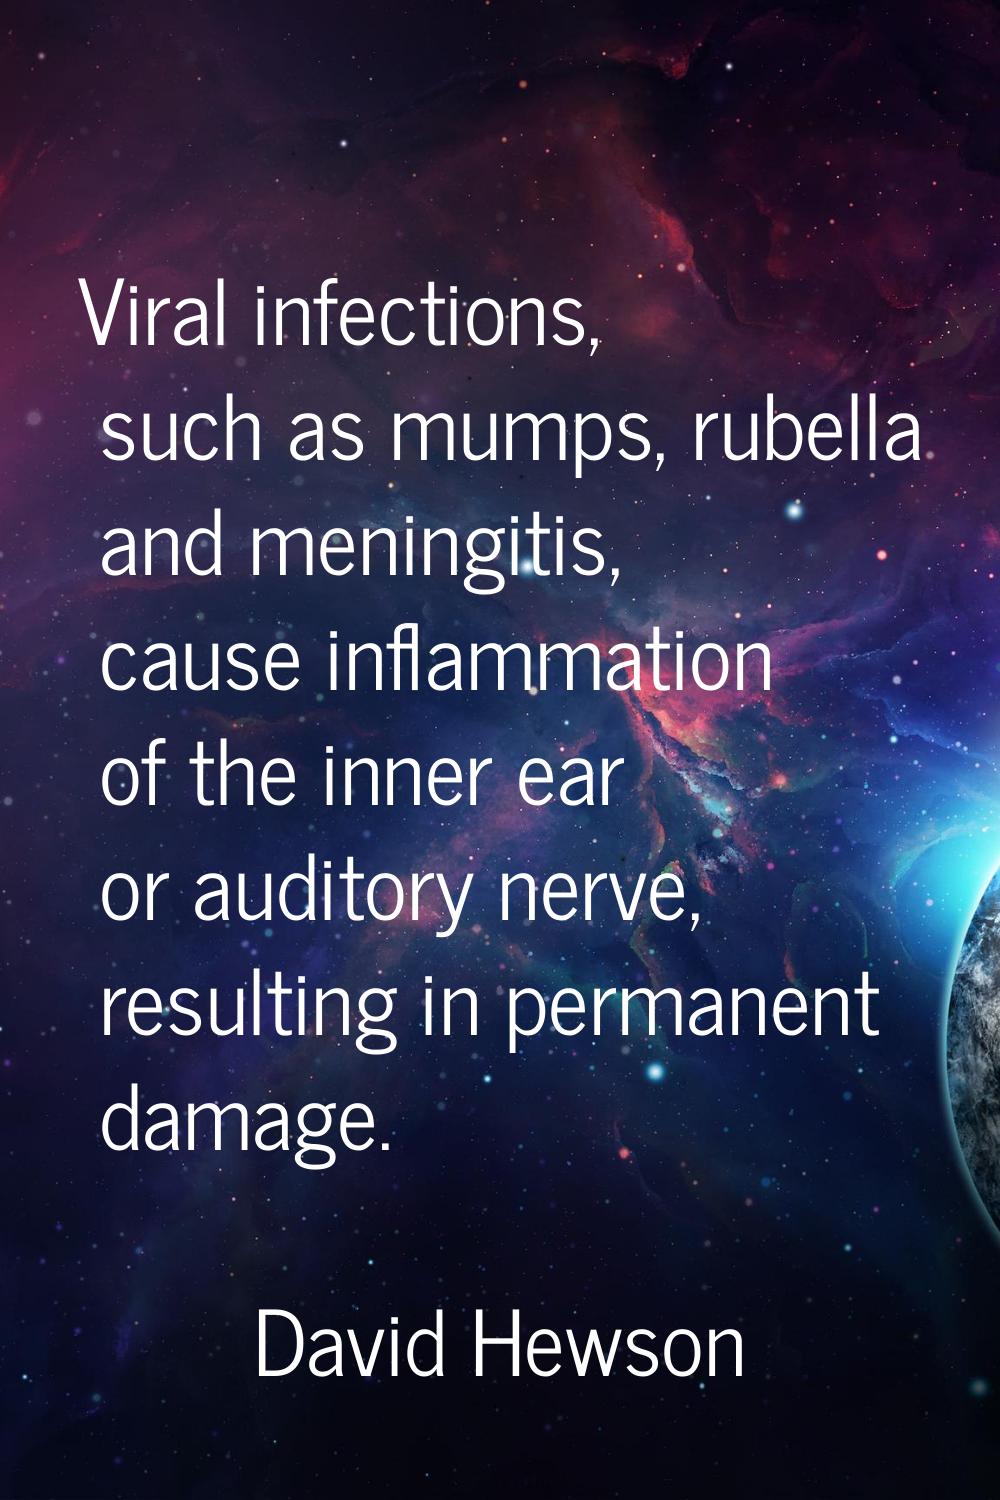 Viral infections, such as mumps, rubella and meningitis, cause inflammation of the inner ear or aud